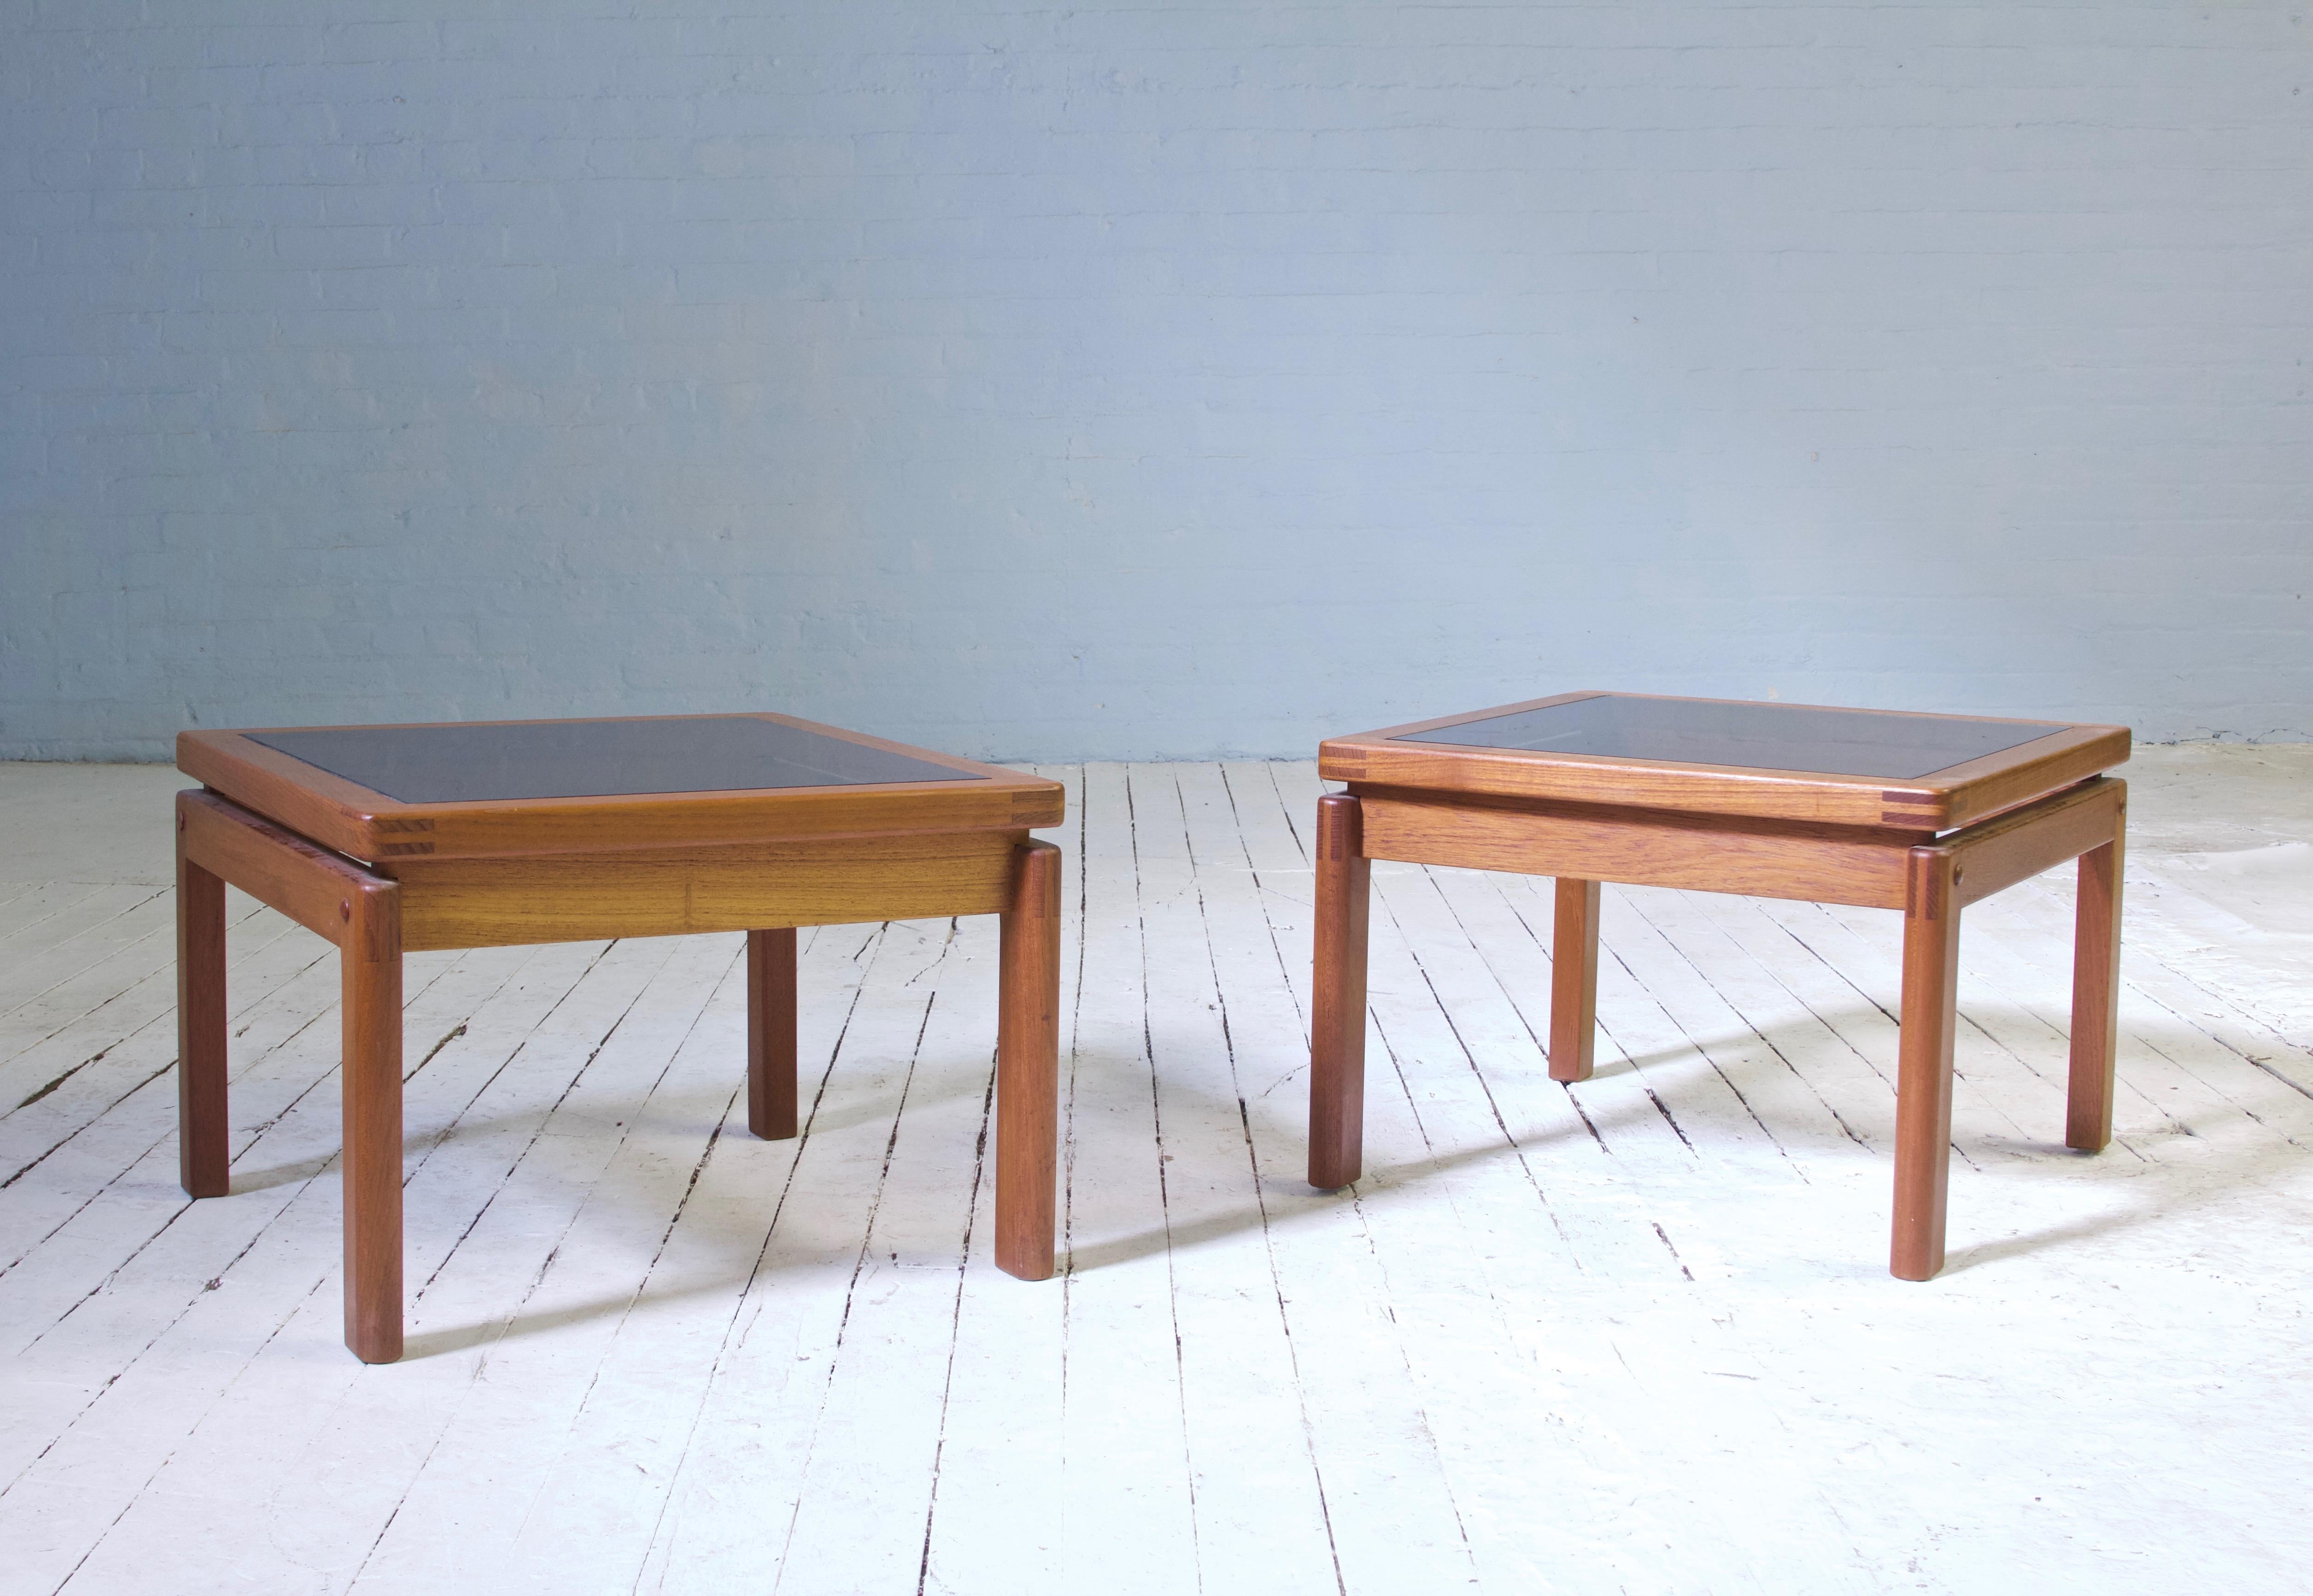 Vintage Pair of Signed Danish Side Tables with Exposed Joinery in Teak, 1960s In Good Condition For Sale In Brooklyn, NY